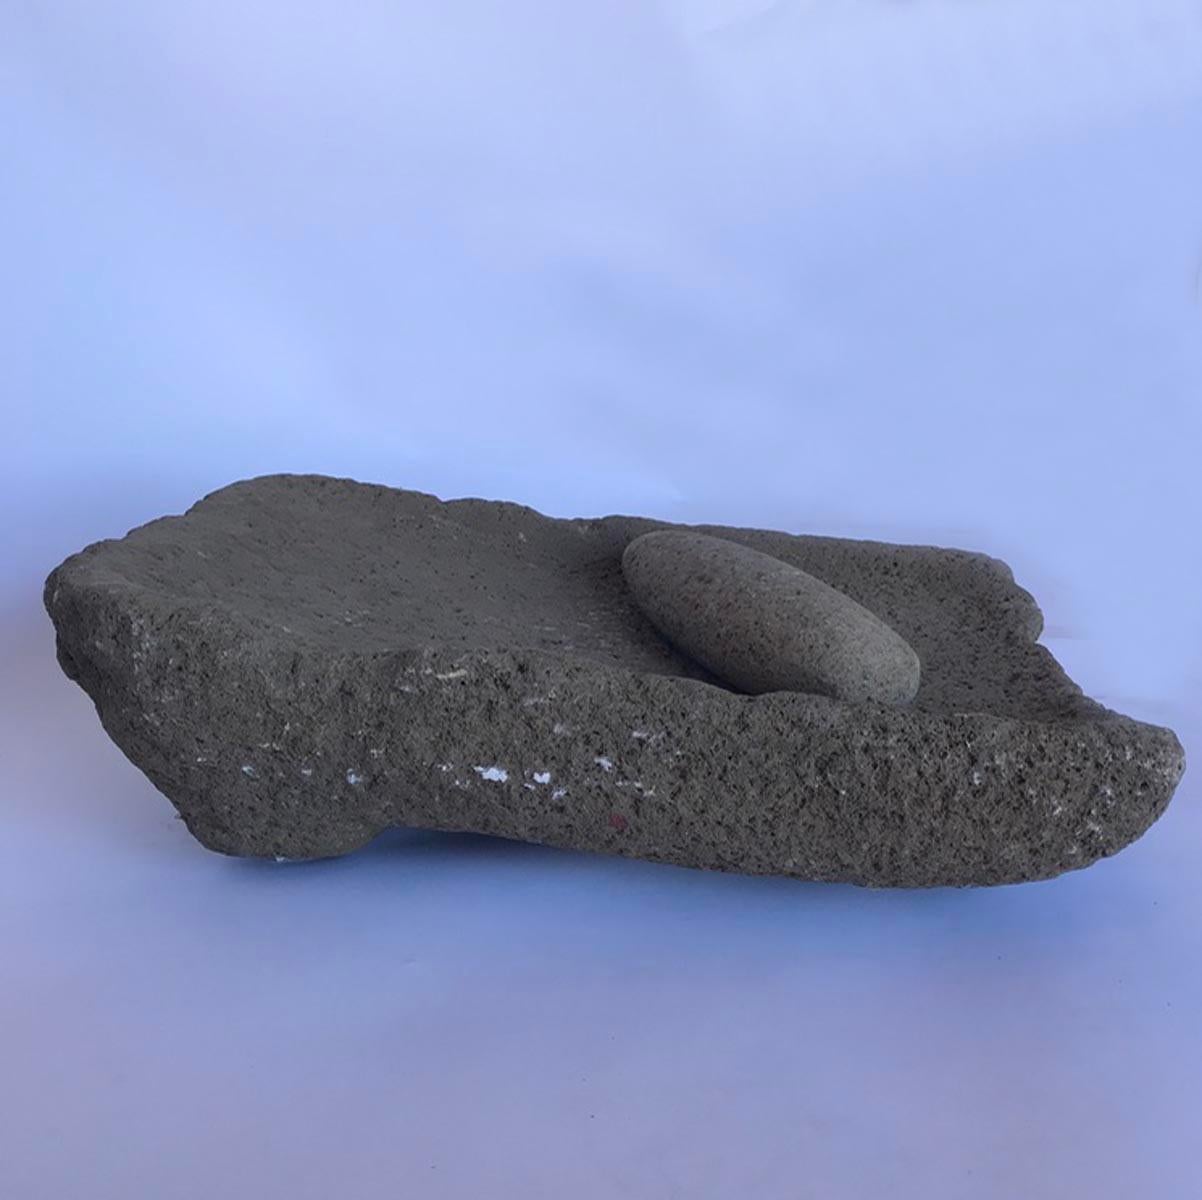 Early 20th century Guatemalan stone matate, or piedra de moler - grinding stone. Carved from one piece of stone, usually volcanic rock. Used for grinding corn and seeds. Comes with the grinder.